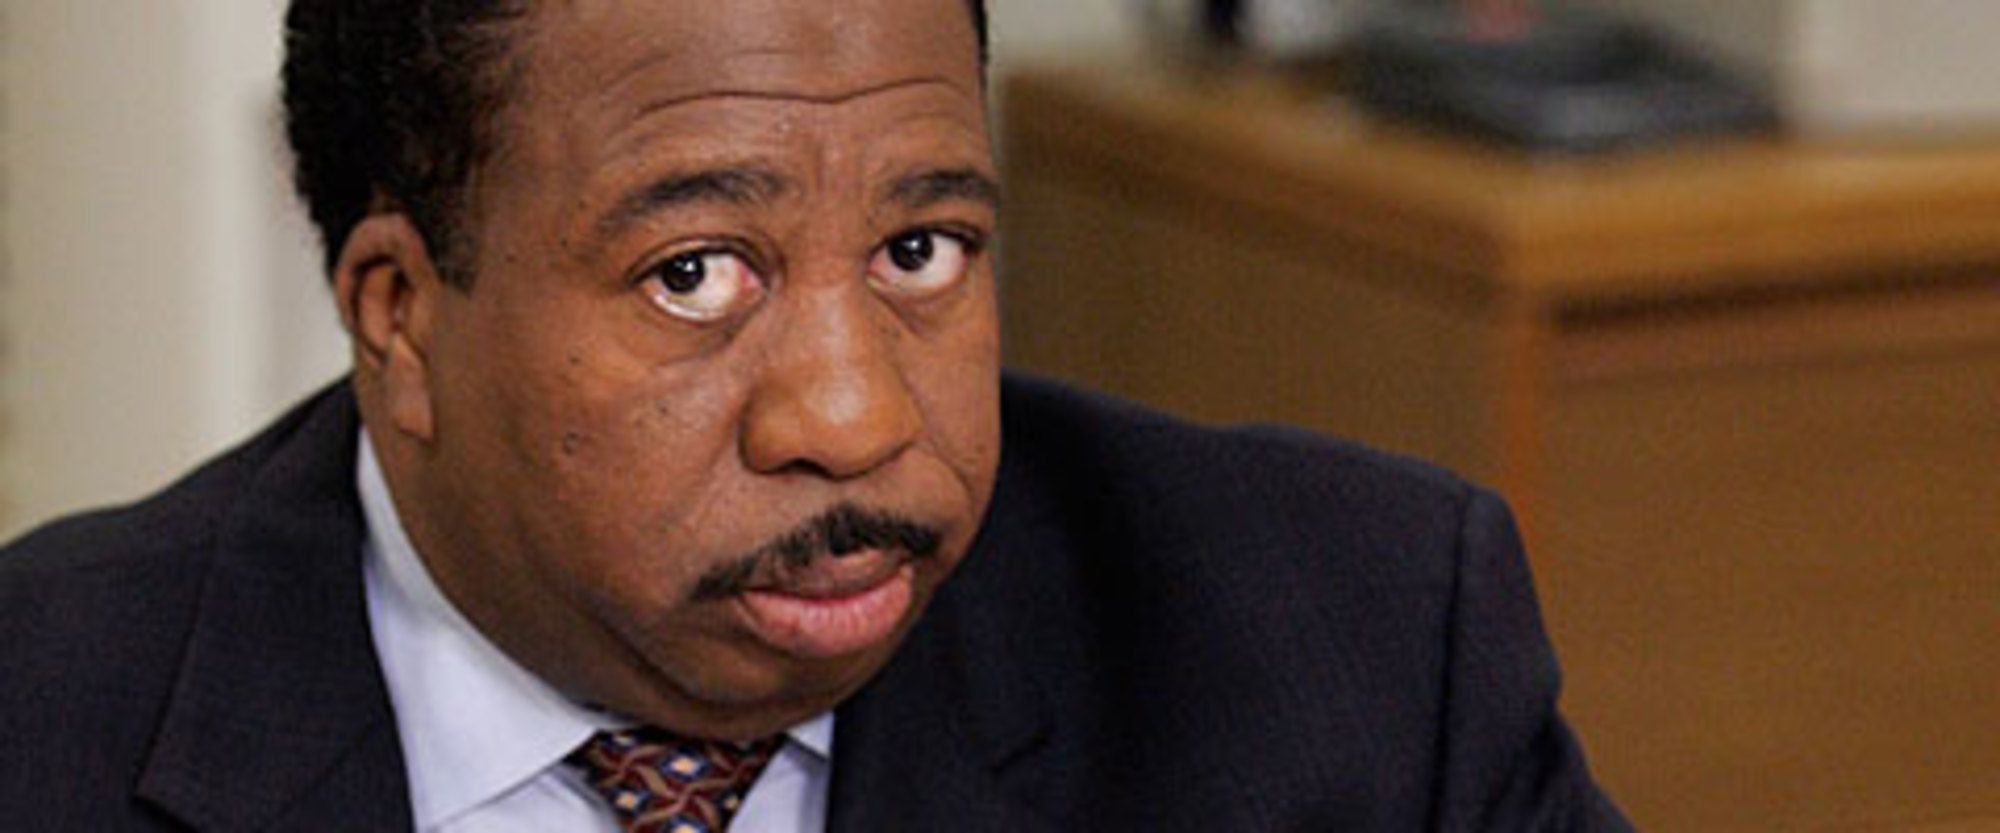 Stanley Hudson from The Office